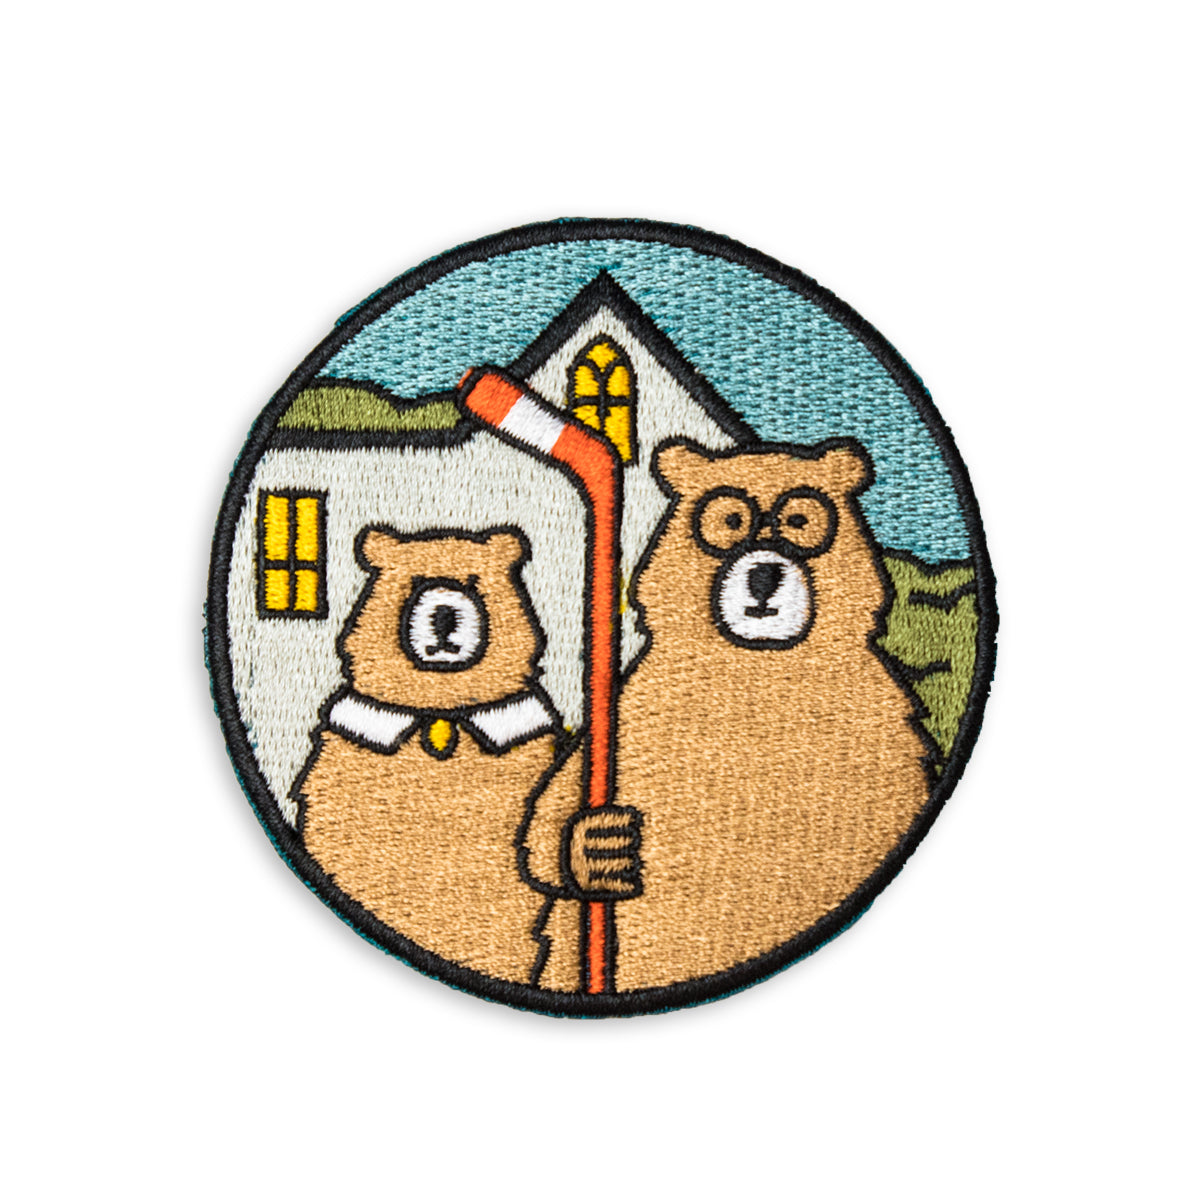 3" x 3" embroidered circle patch with two bear illustrations, one holding a hockey stick, in front of a house inspired by american gothic painting